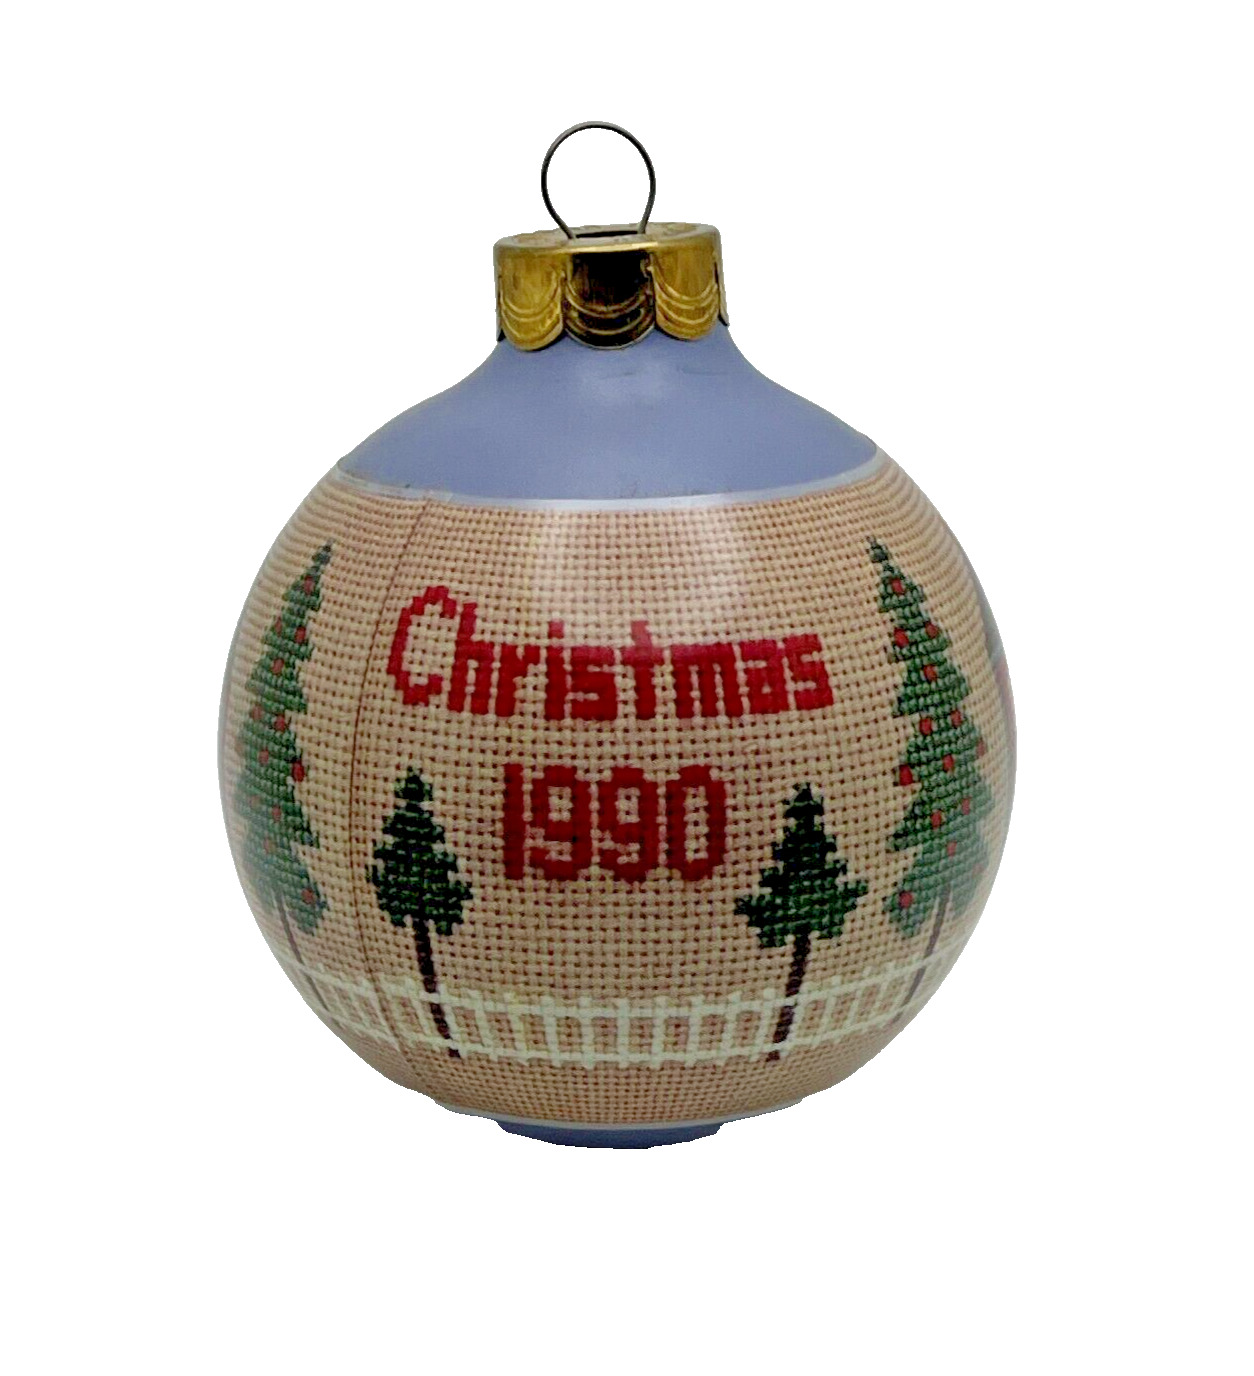 Hallmark Keepsake Christmas 1990 From Our Home To Yours Sampler Ball Ornament